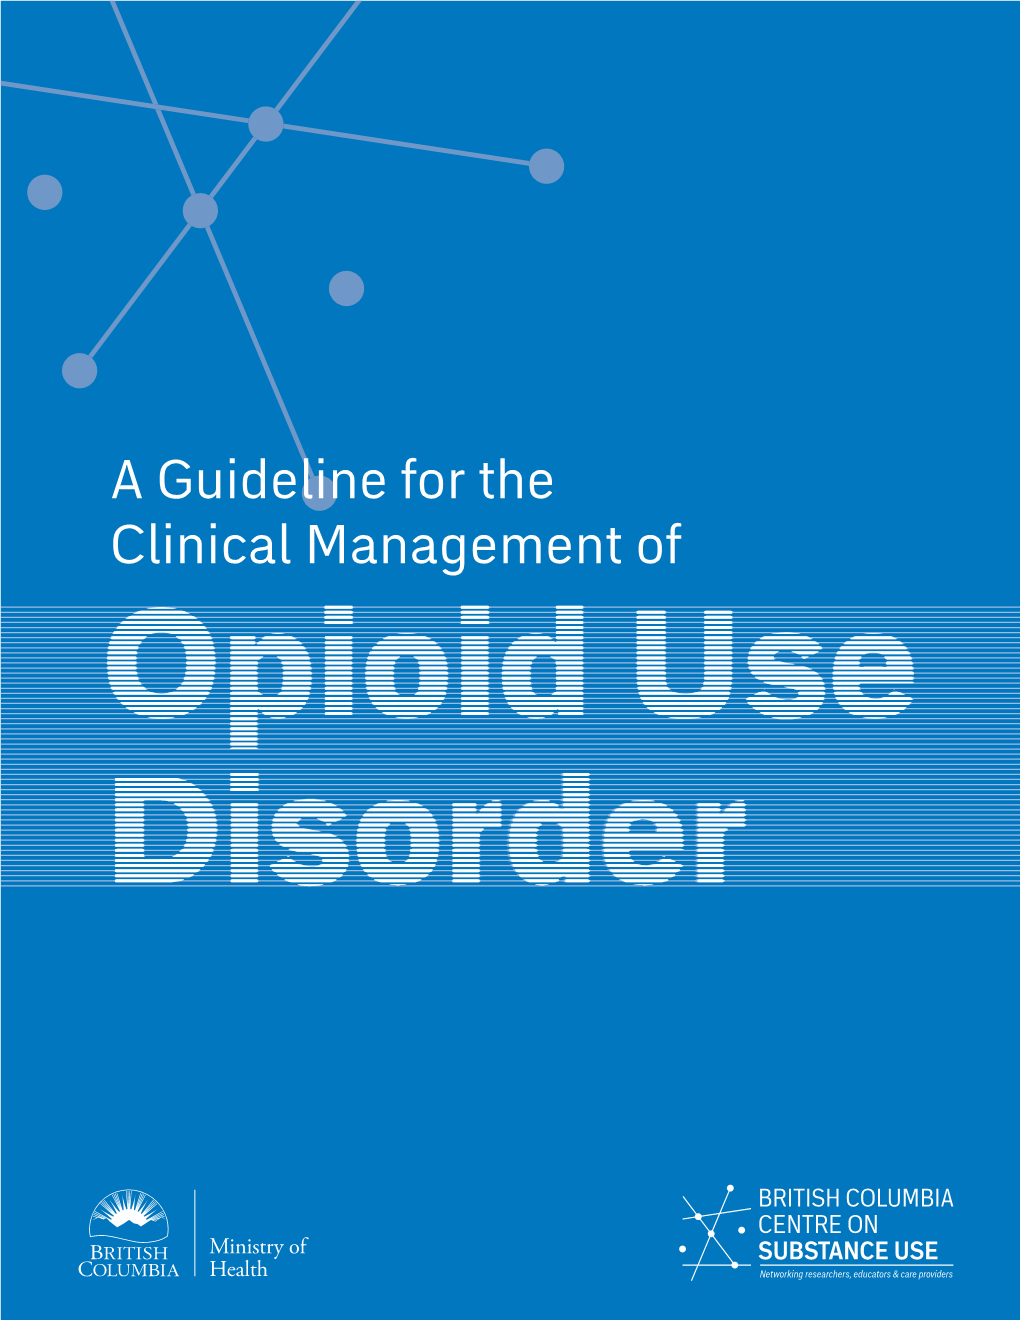 BCCSU Guideline for the Clinical Management of Opioid Use Disorder